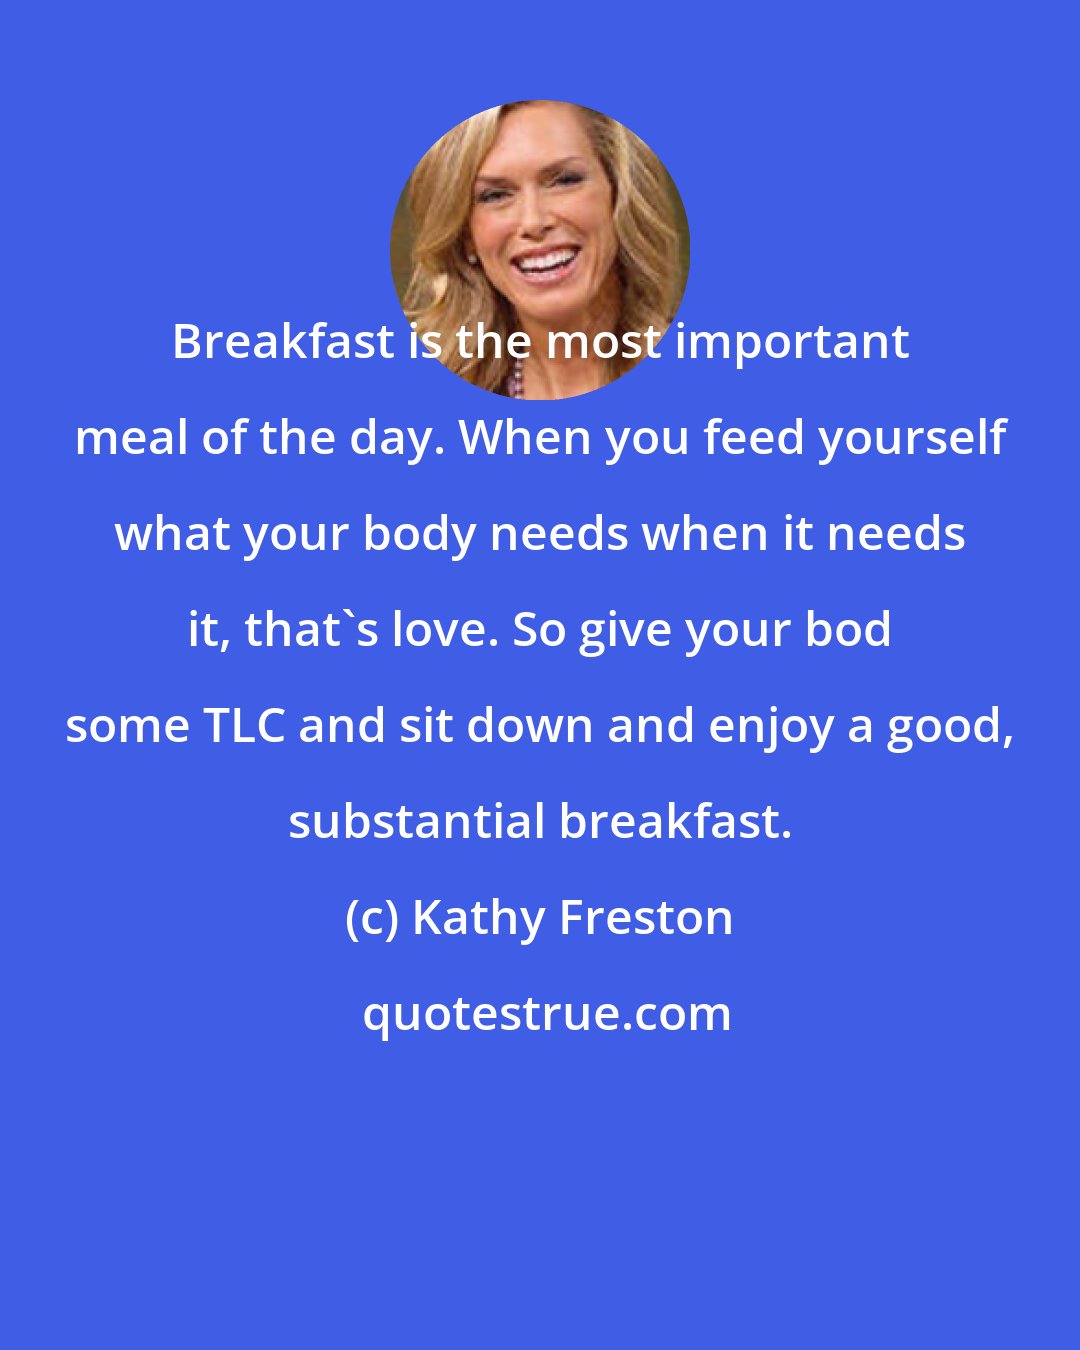 Kathy Freston: Breakfast is the most important meal of the day. When you feed yourself what your body needs when it needs it, that's love. So give your bod some TLC and sit down and enjoy a good, substantial breakfast.